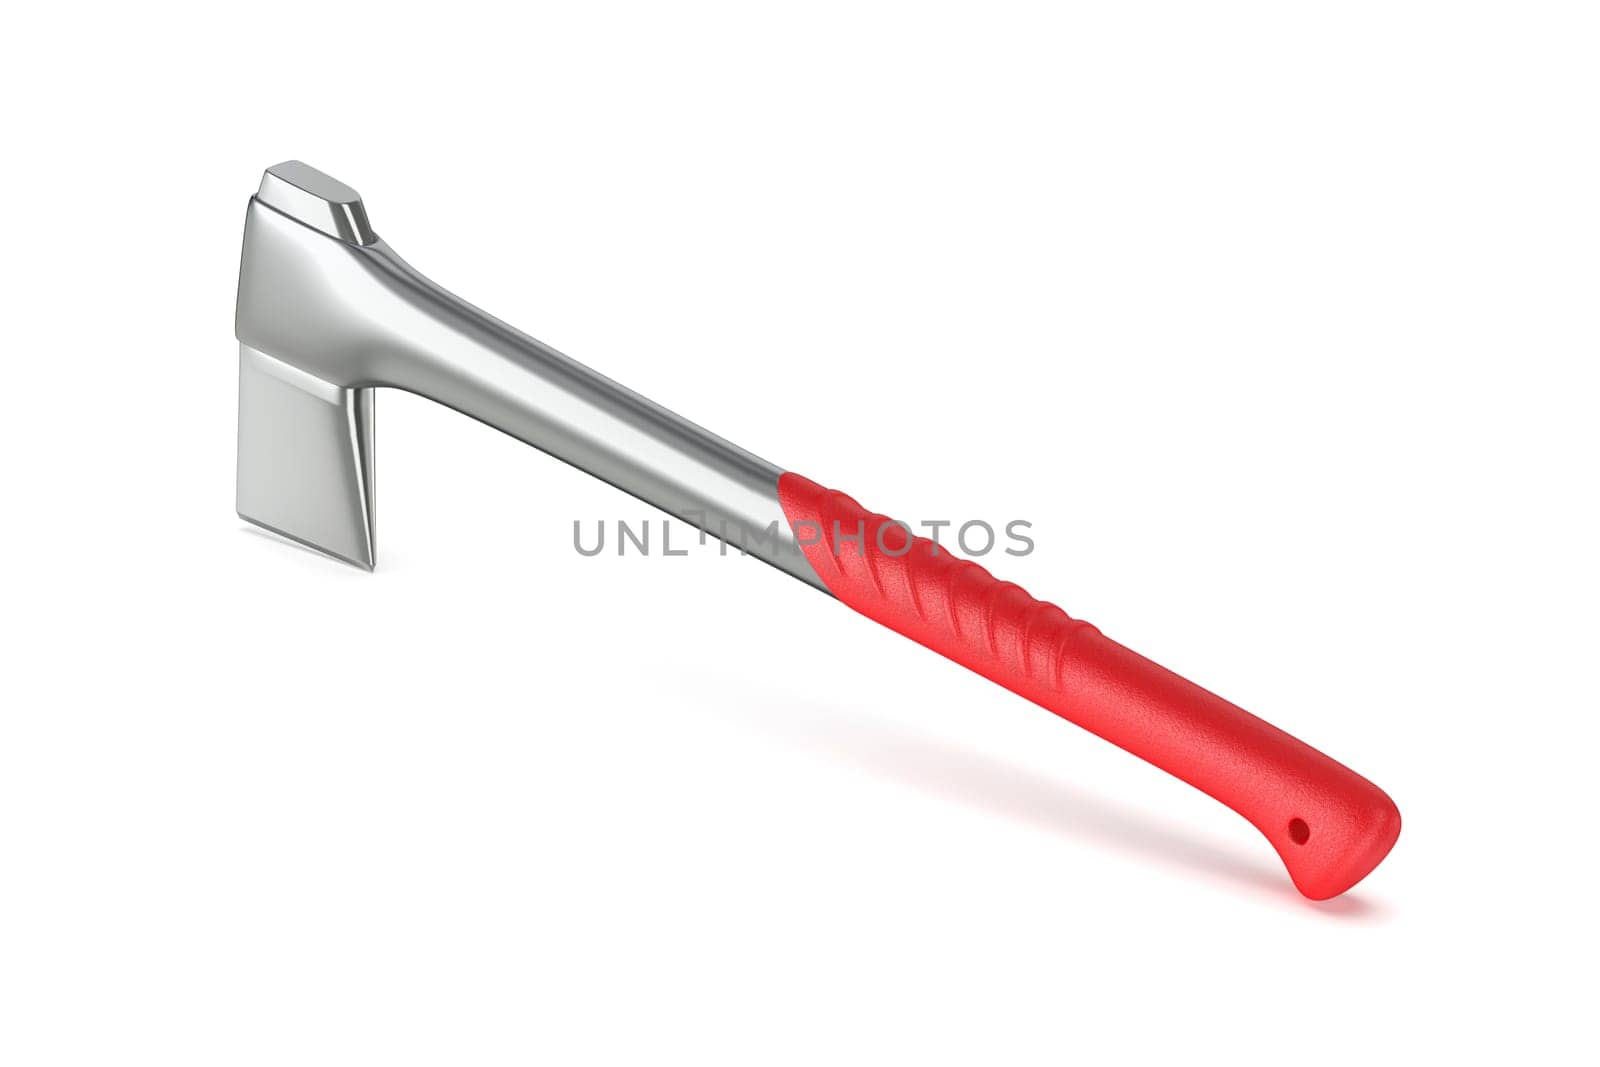 Small axe with red handle by magraphics